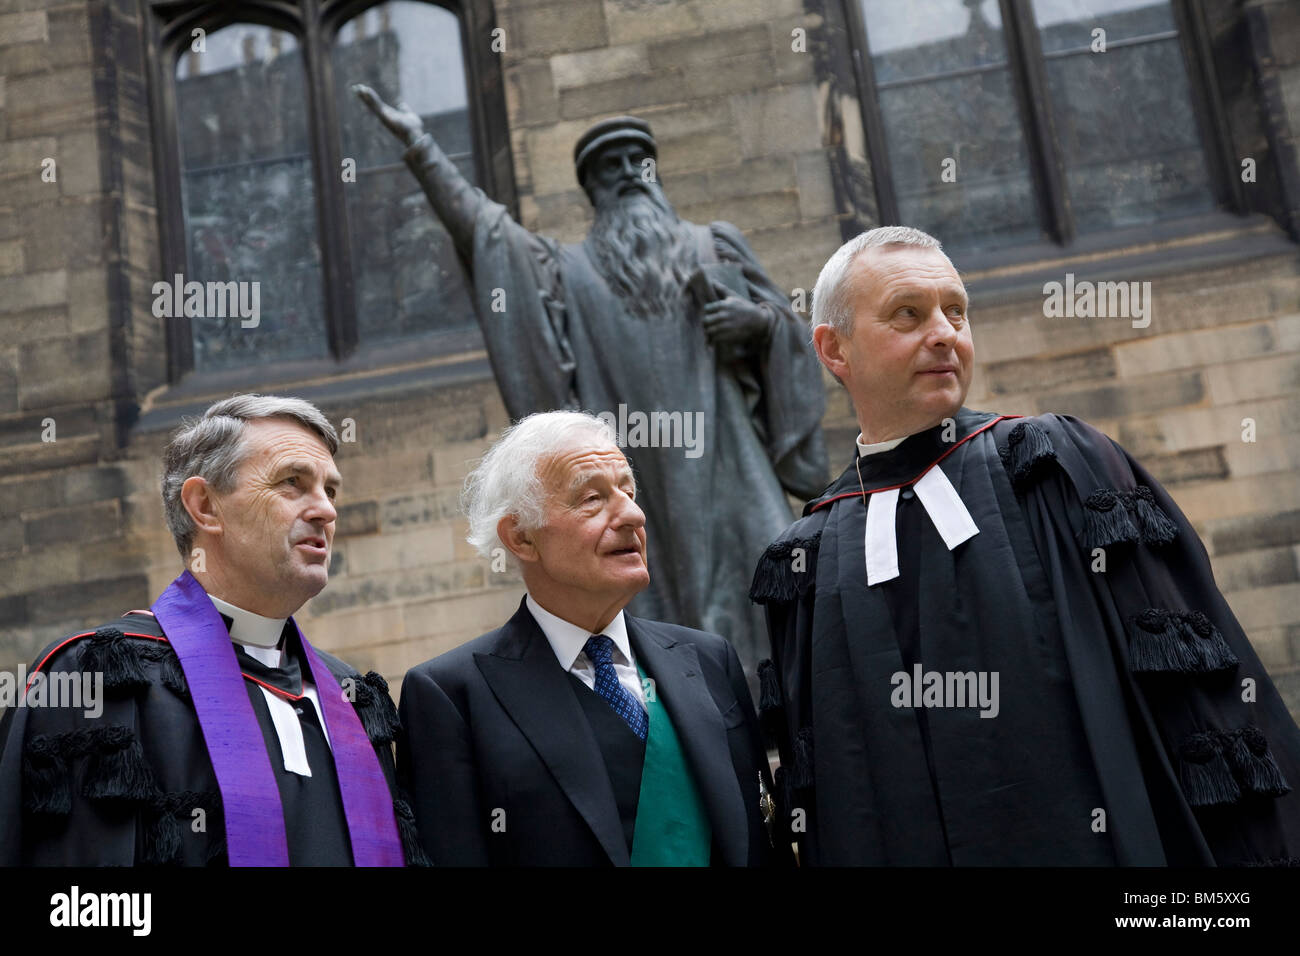 The General Assembly of The Church of Scotland 2010. Stock Photo